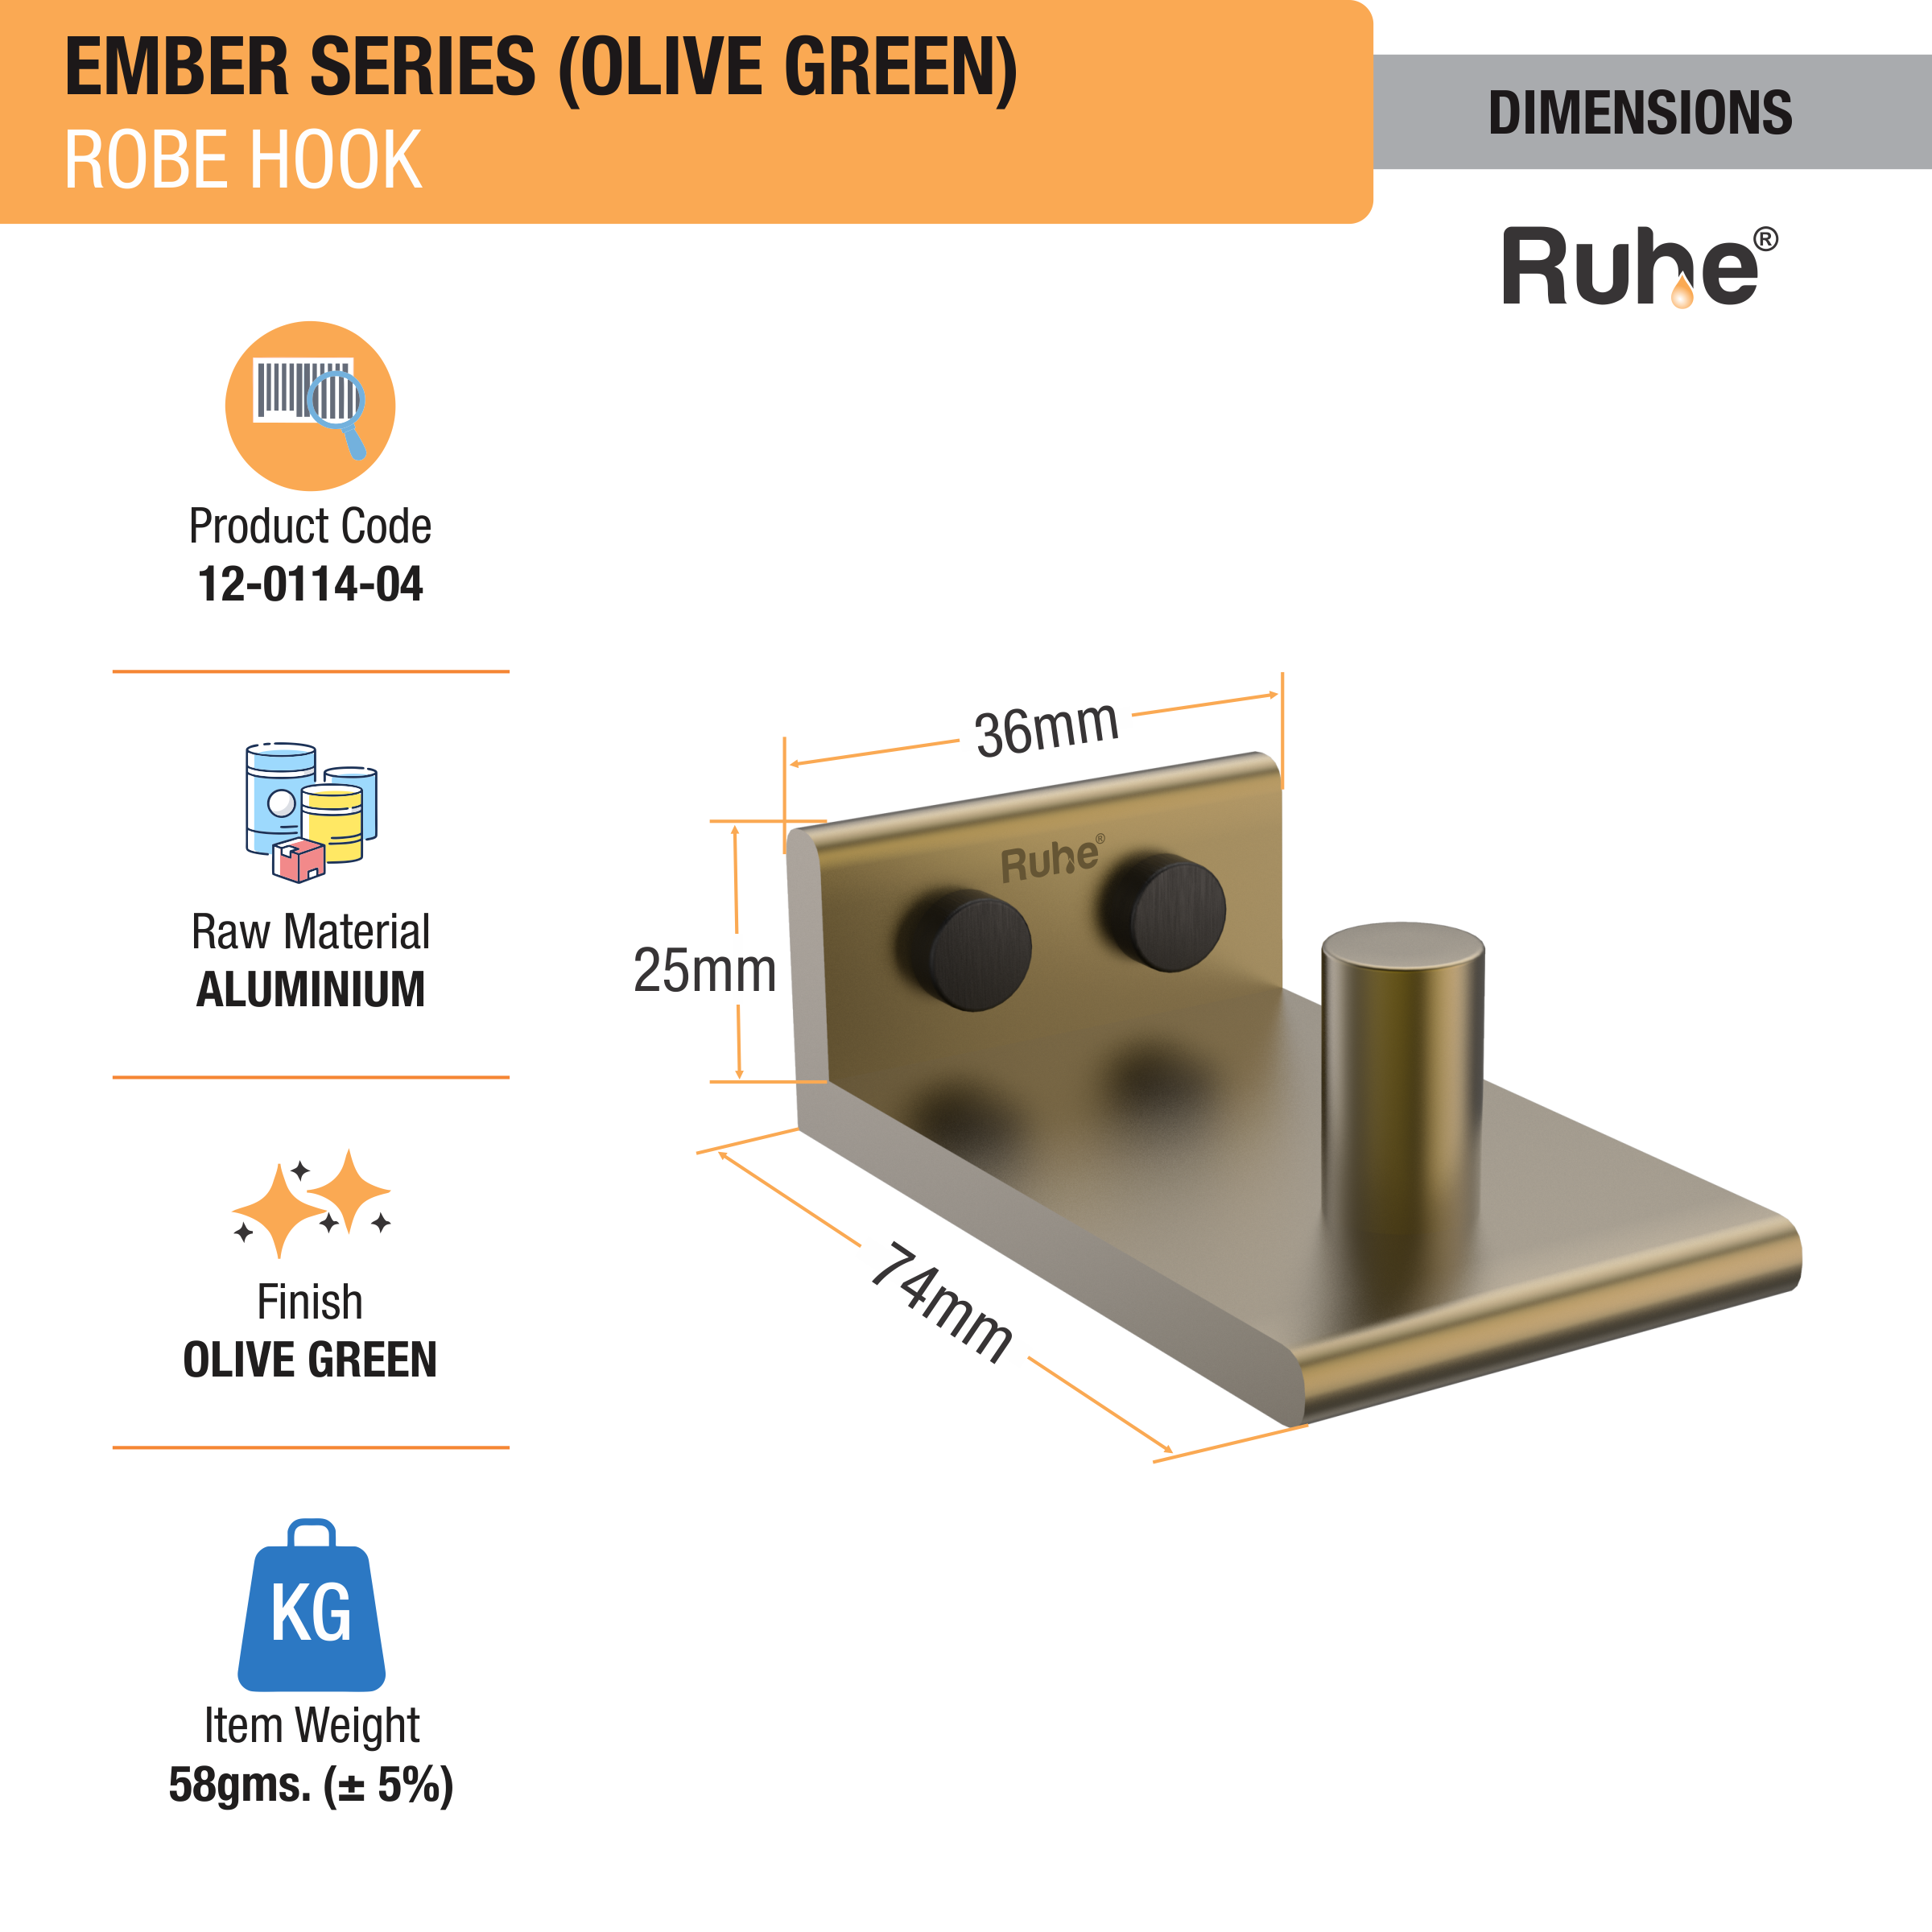 Ember Olive Green Robe Hook (Space Aluminium) dimensions and sizes